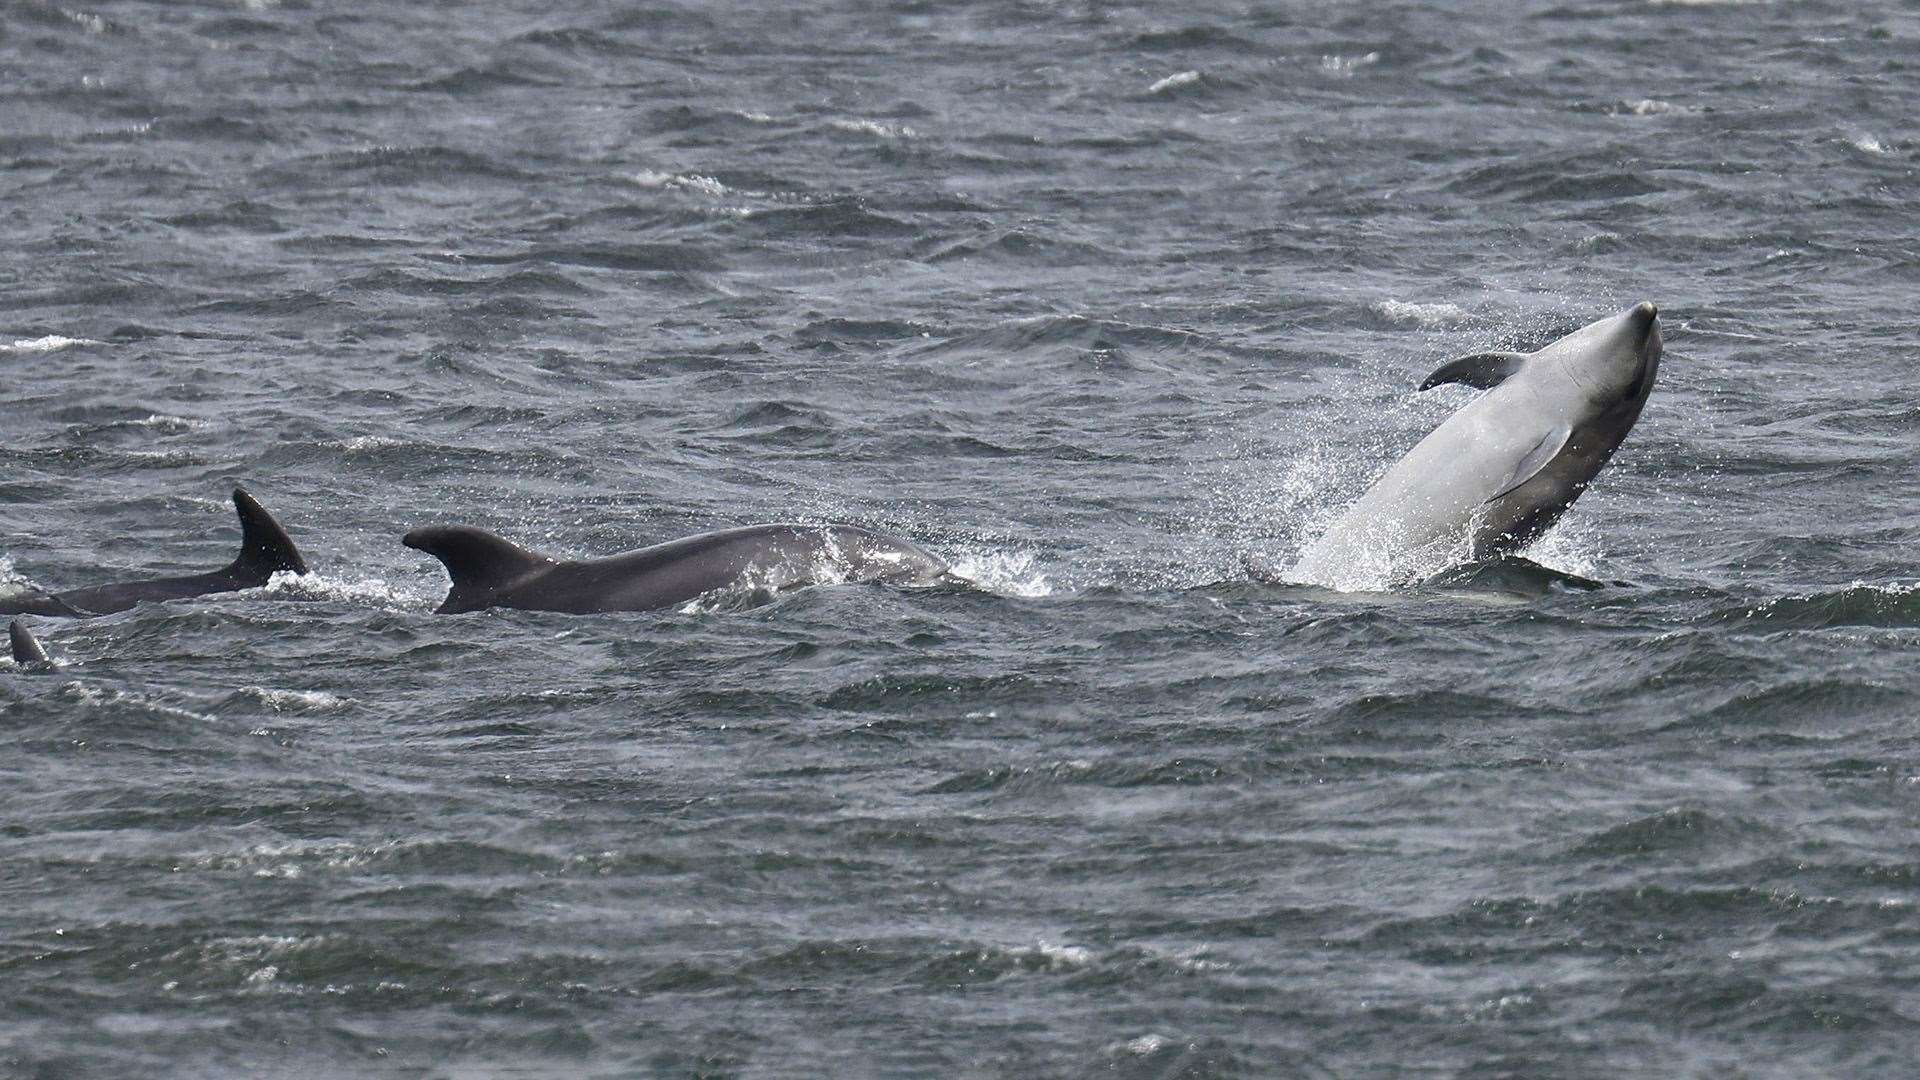 Dolphins off Chanonry on the Black Isle. Picture Charlie Phillips.